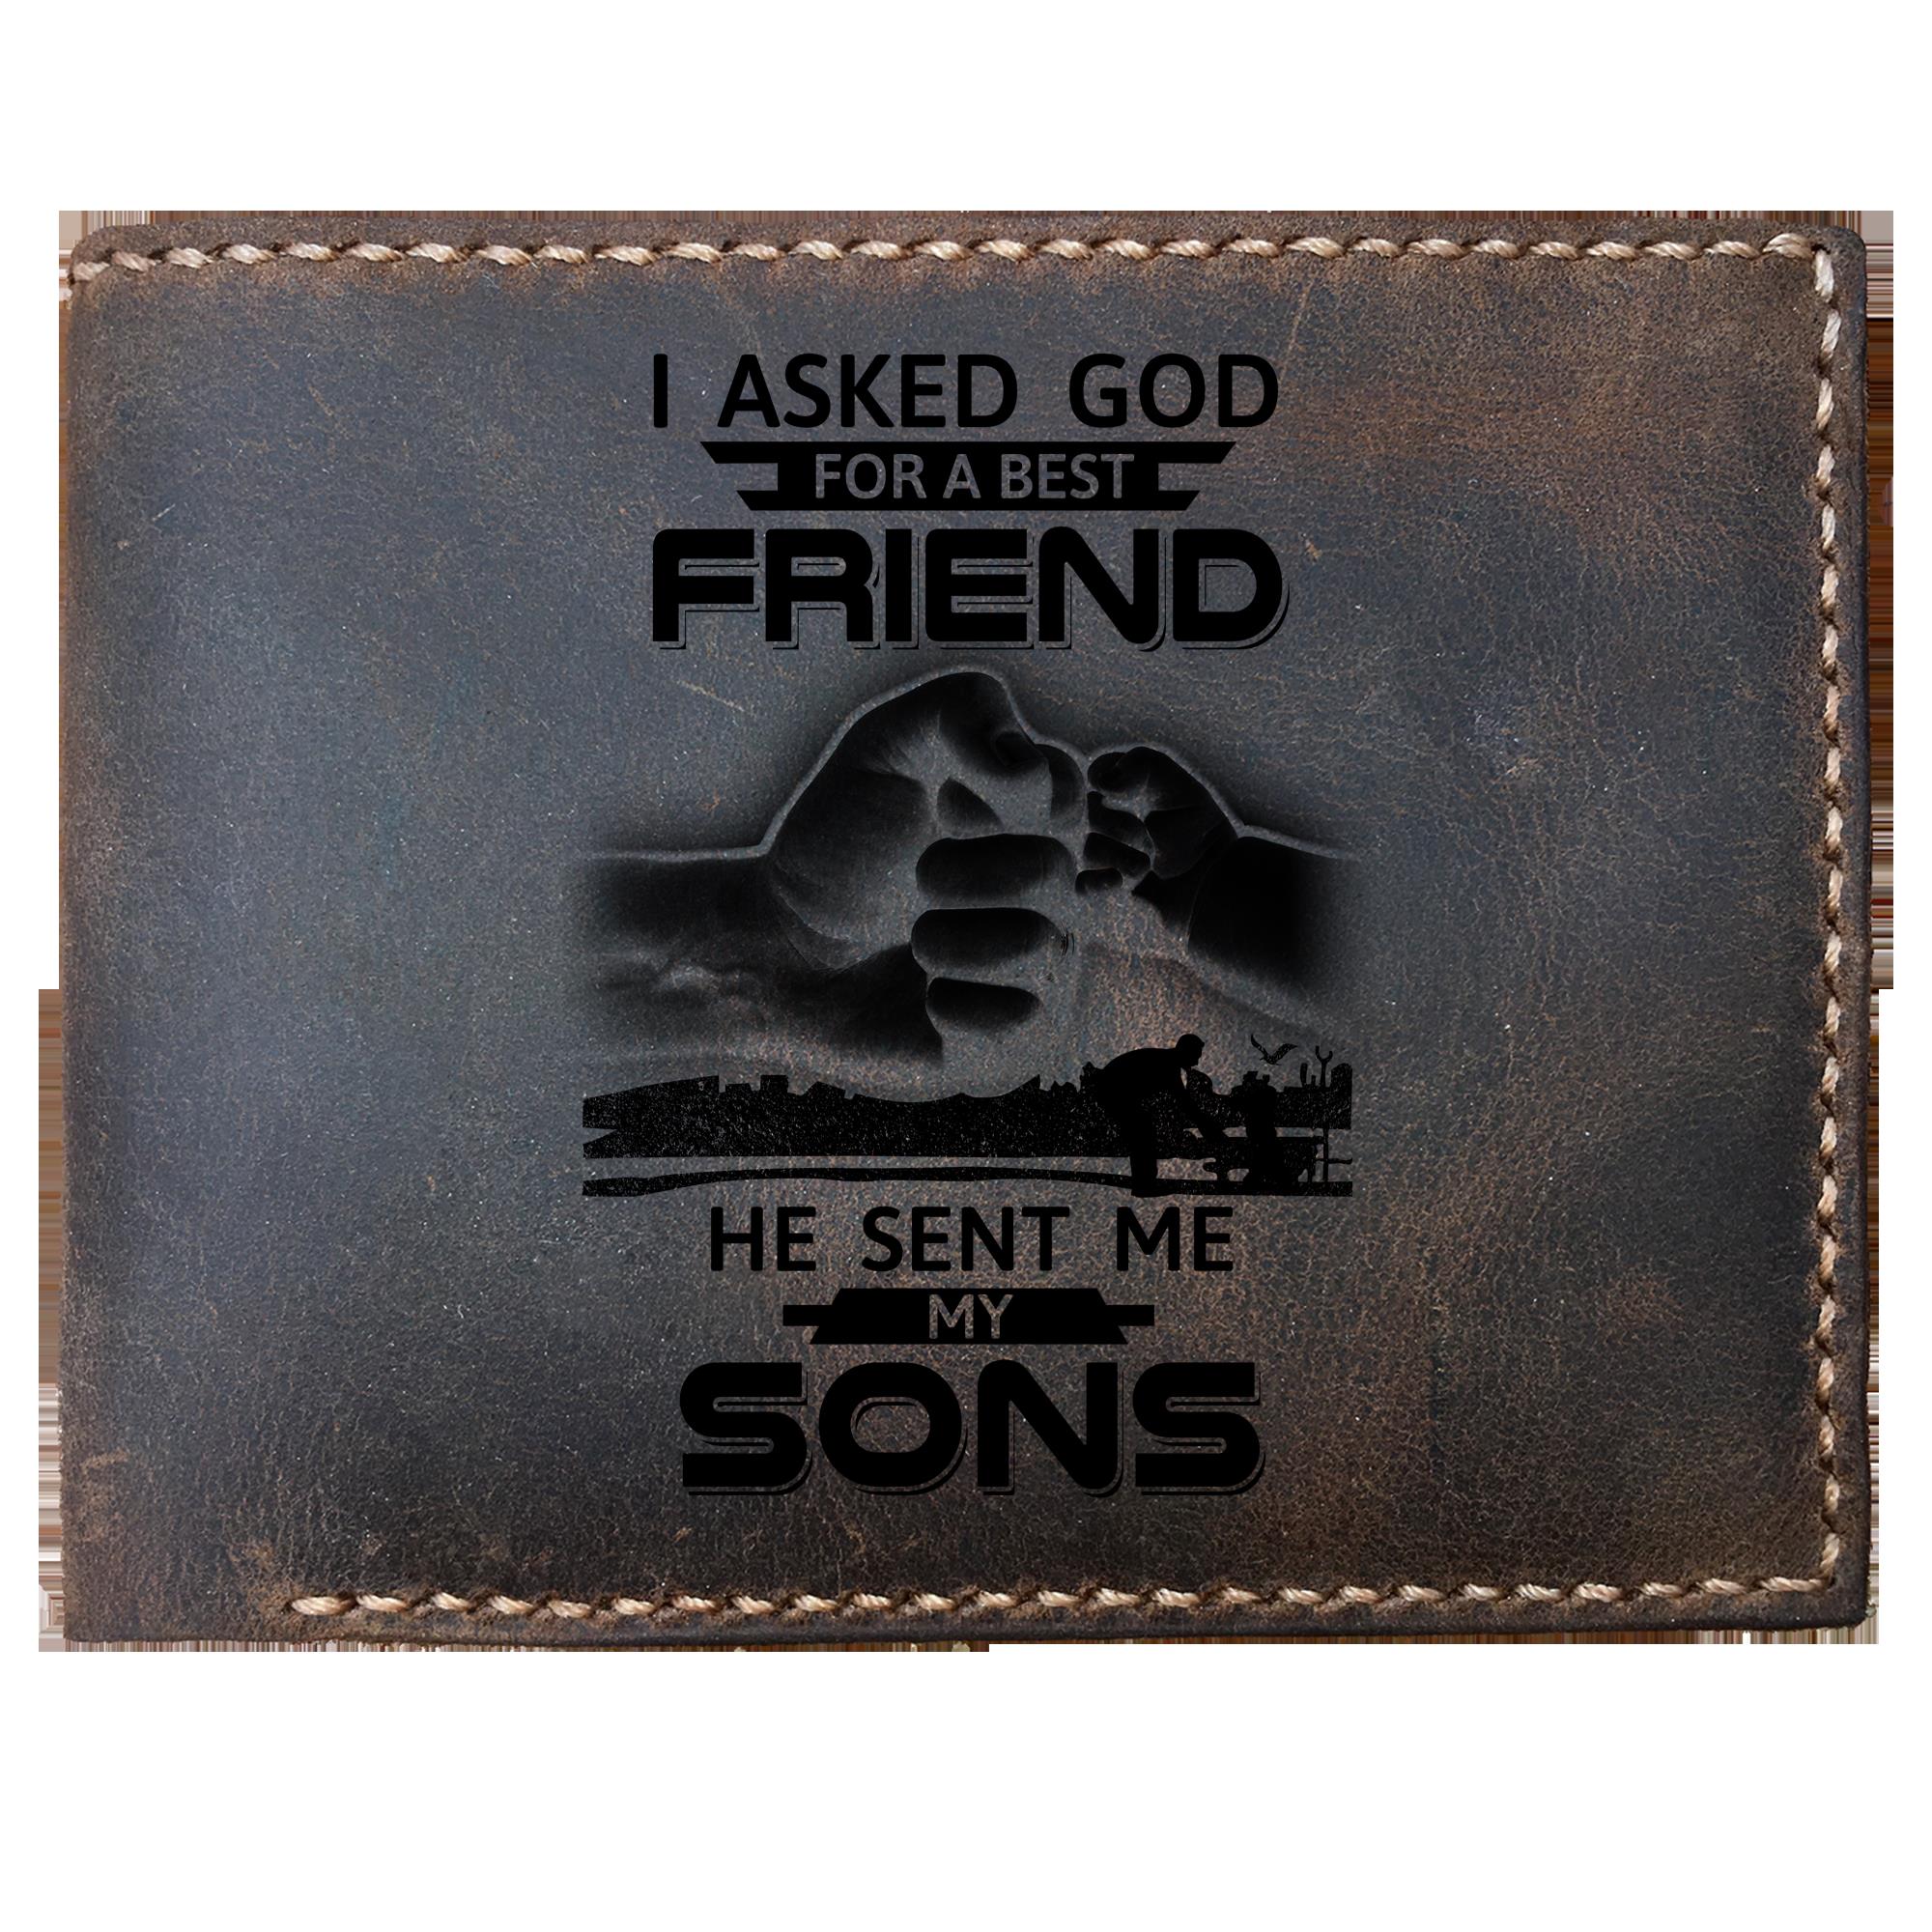 Skitongifts Funny Custom Laser Engraved Bifold Leather Wallet For Men, I Asked God For A Best Friend He Sent Me My Sons